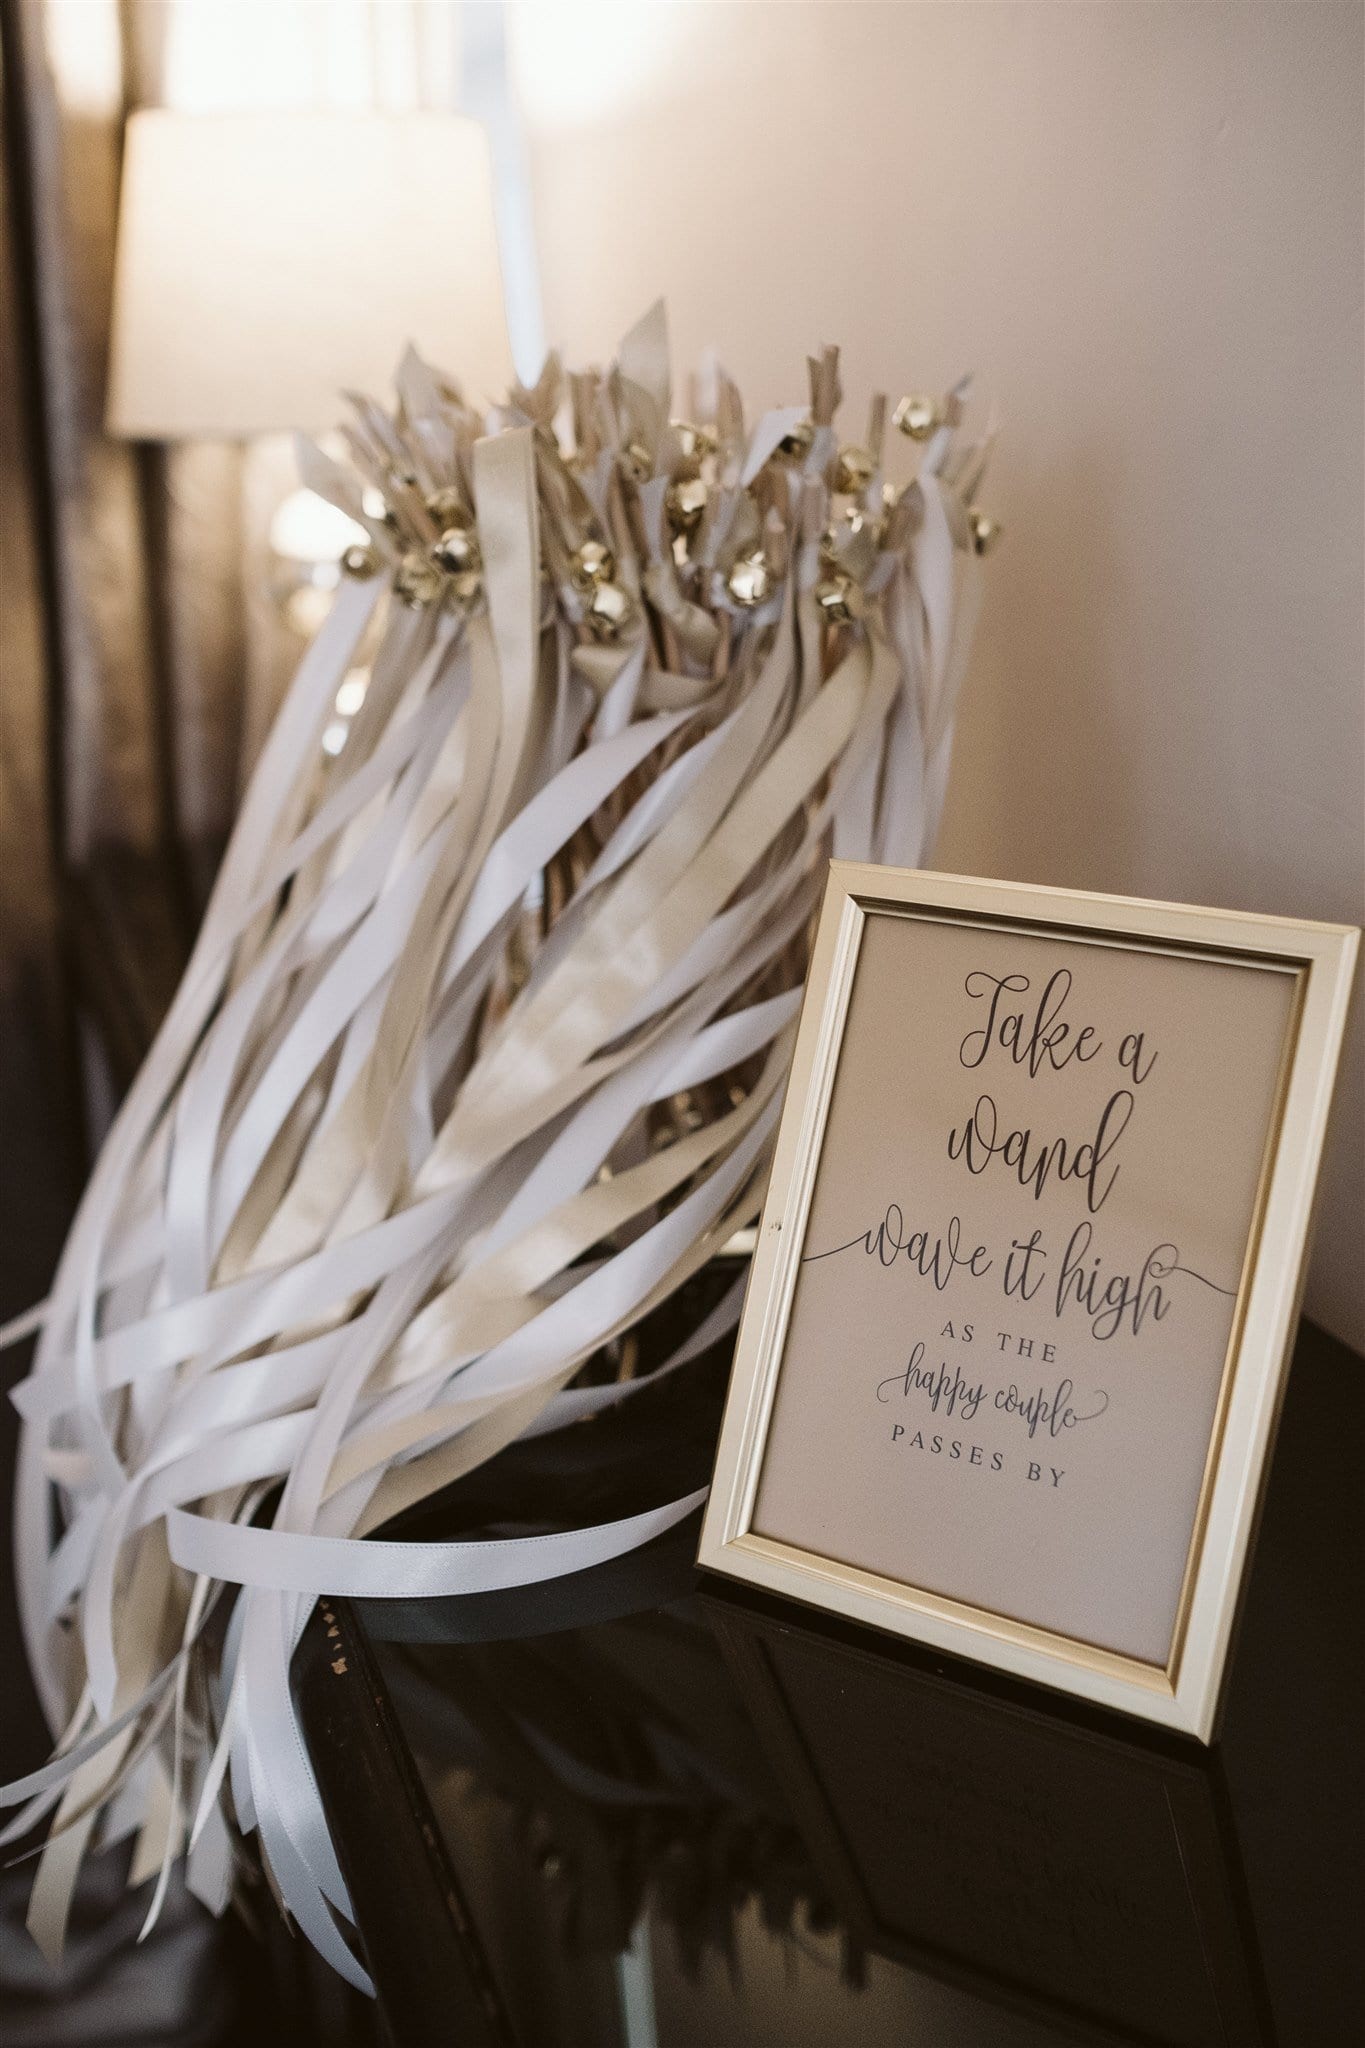 Ribbons on sticks for wedding recessional